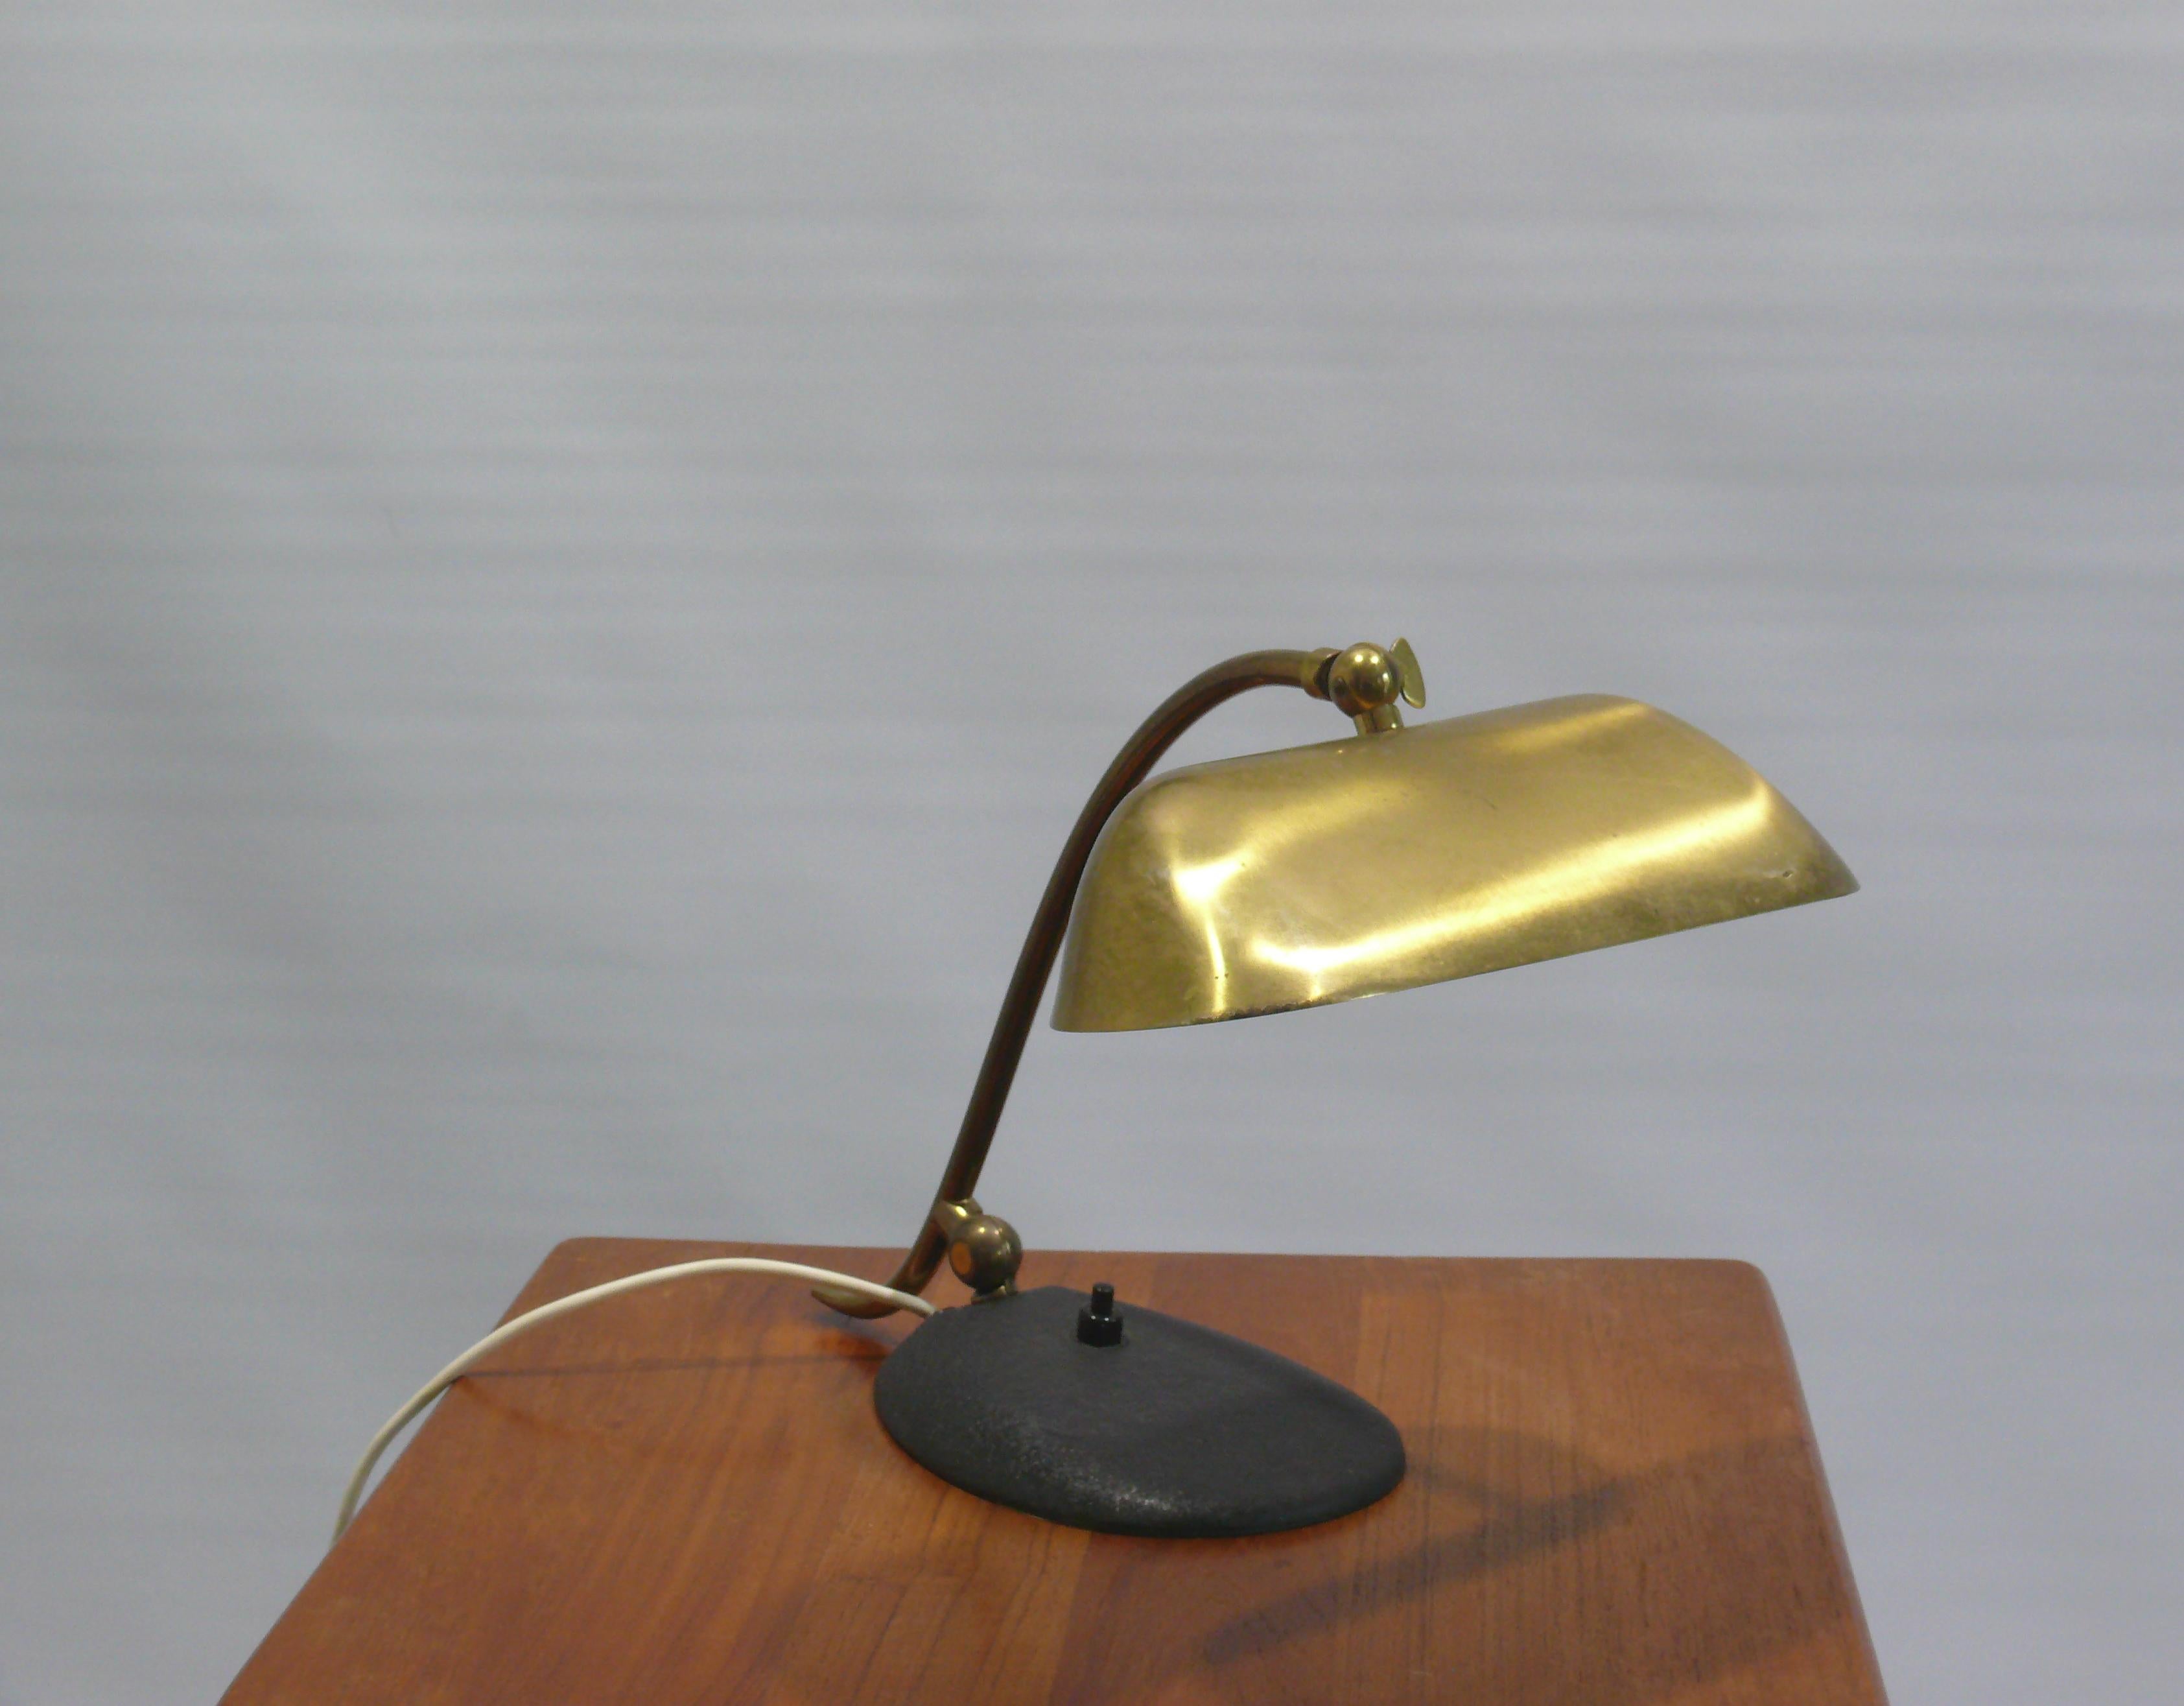 Very solid and rare brass piano lamp from the 1950s - 1960s. The lamp no longer has a manufacturer label. But it is either a lamp from the company JBS (Joseph Brumberg Sundern) or a piano lamp from the Swedish company ORO.
The lamp impresses with